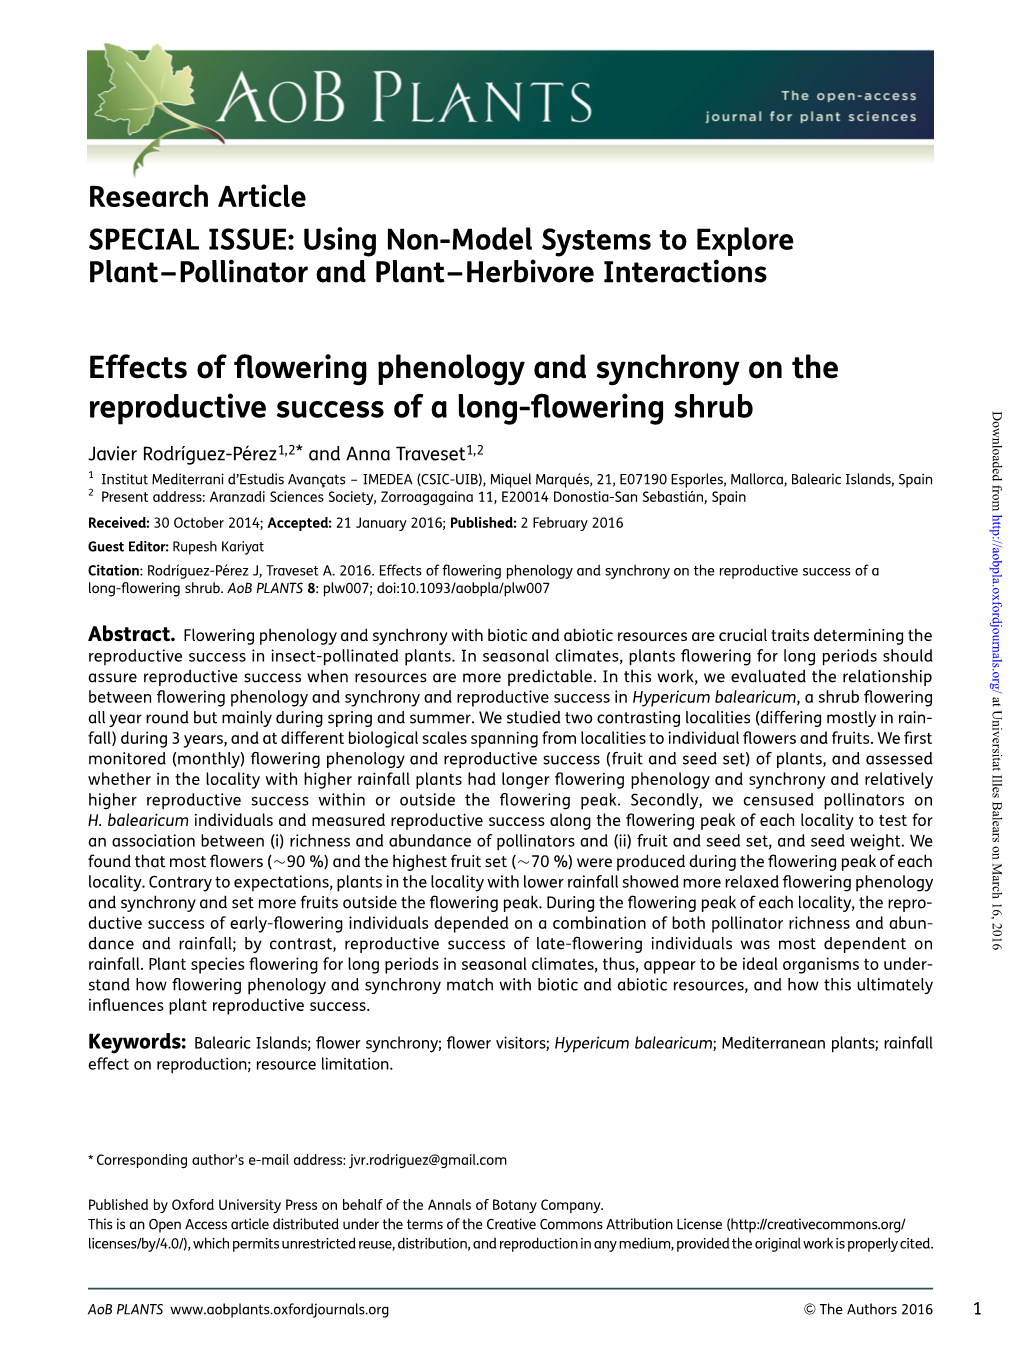 Effects of Flowering Phenology and Synchrony on the Reproductive